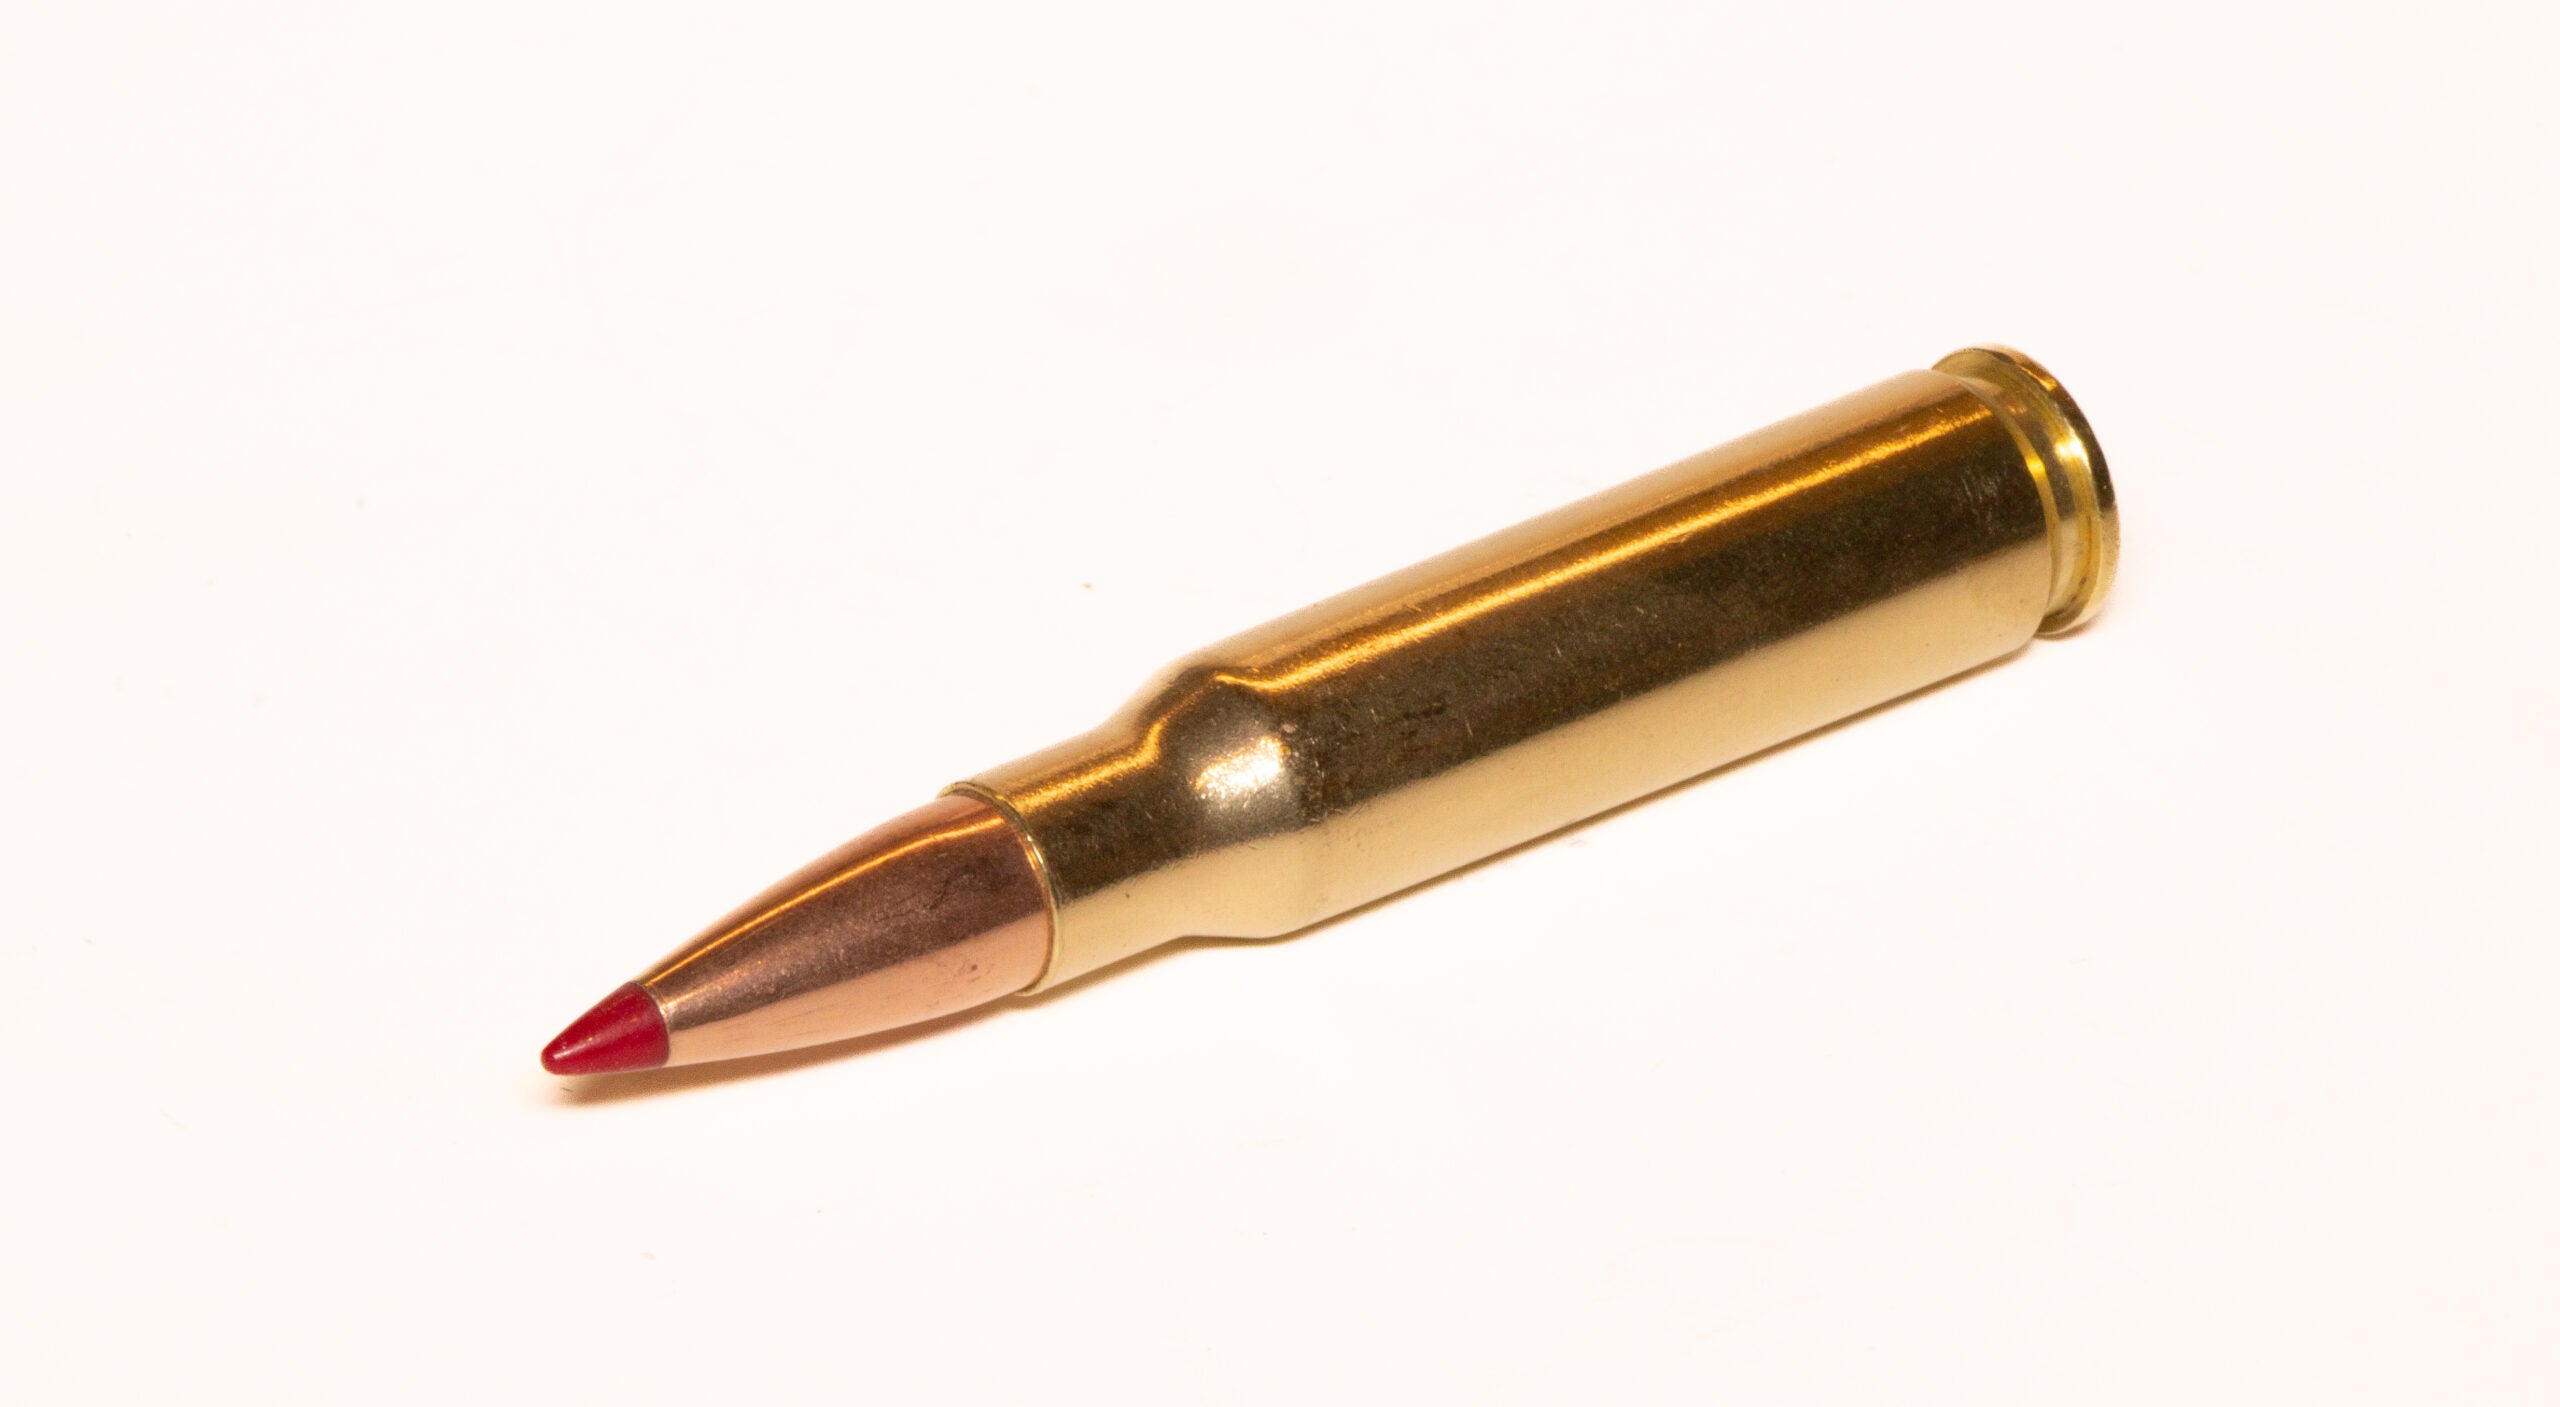 A 308 Winchester cartridge on a white background